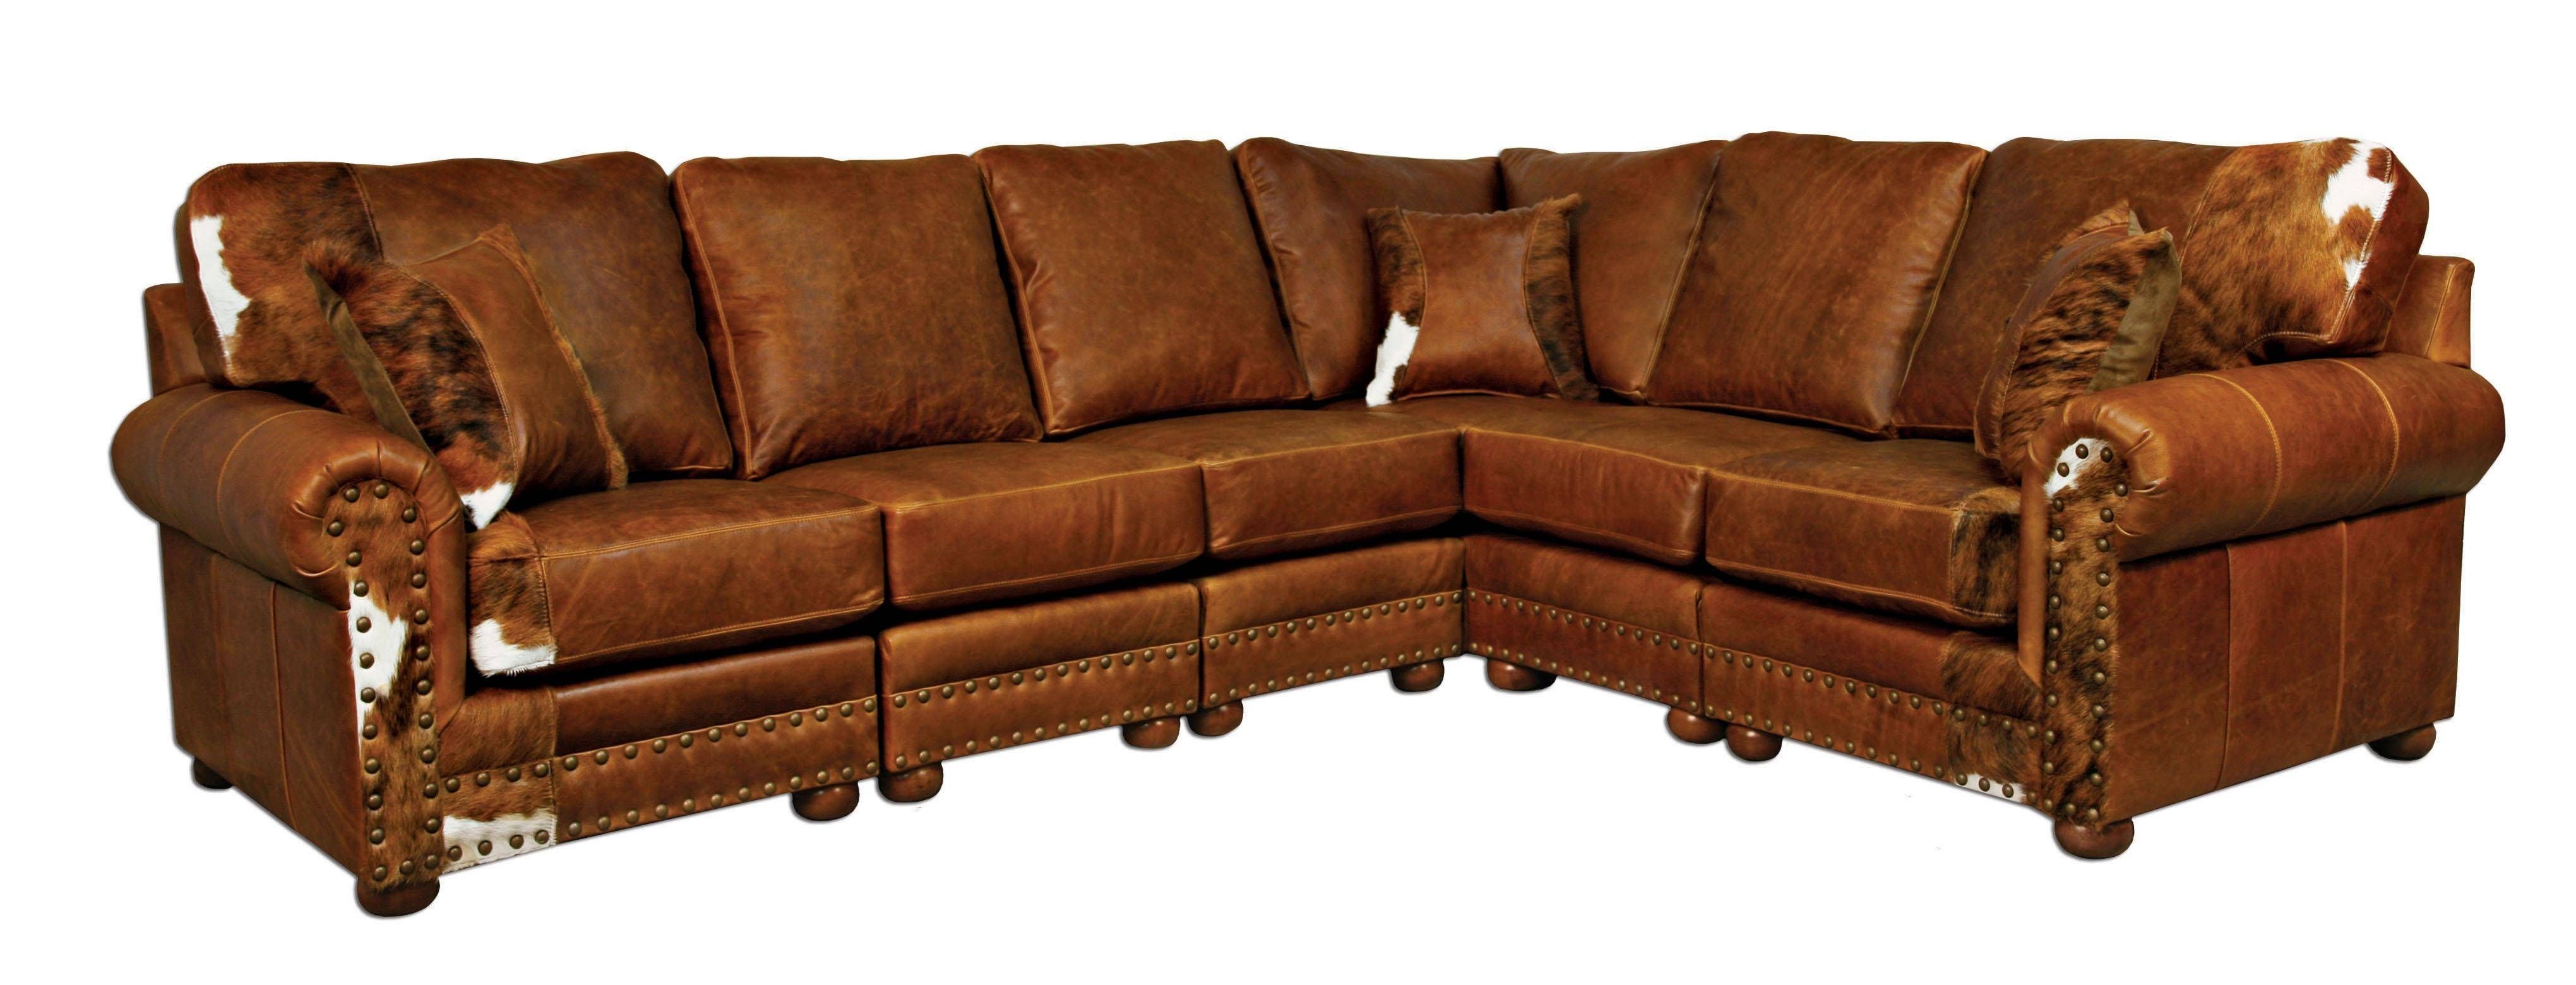 Sofas Center : Rustic Sectional Sofas Wonderful Western Style With Throughout Western Style Sectional Sofas (View 6 of 30)